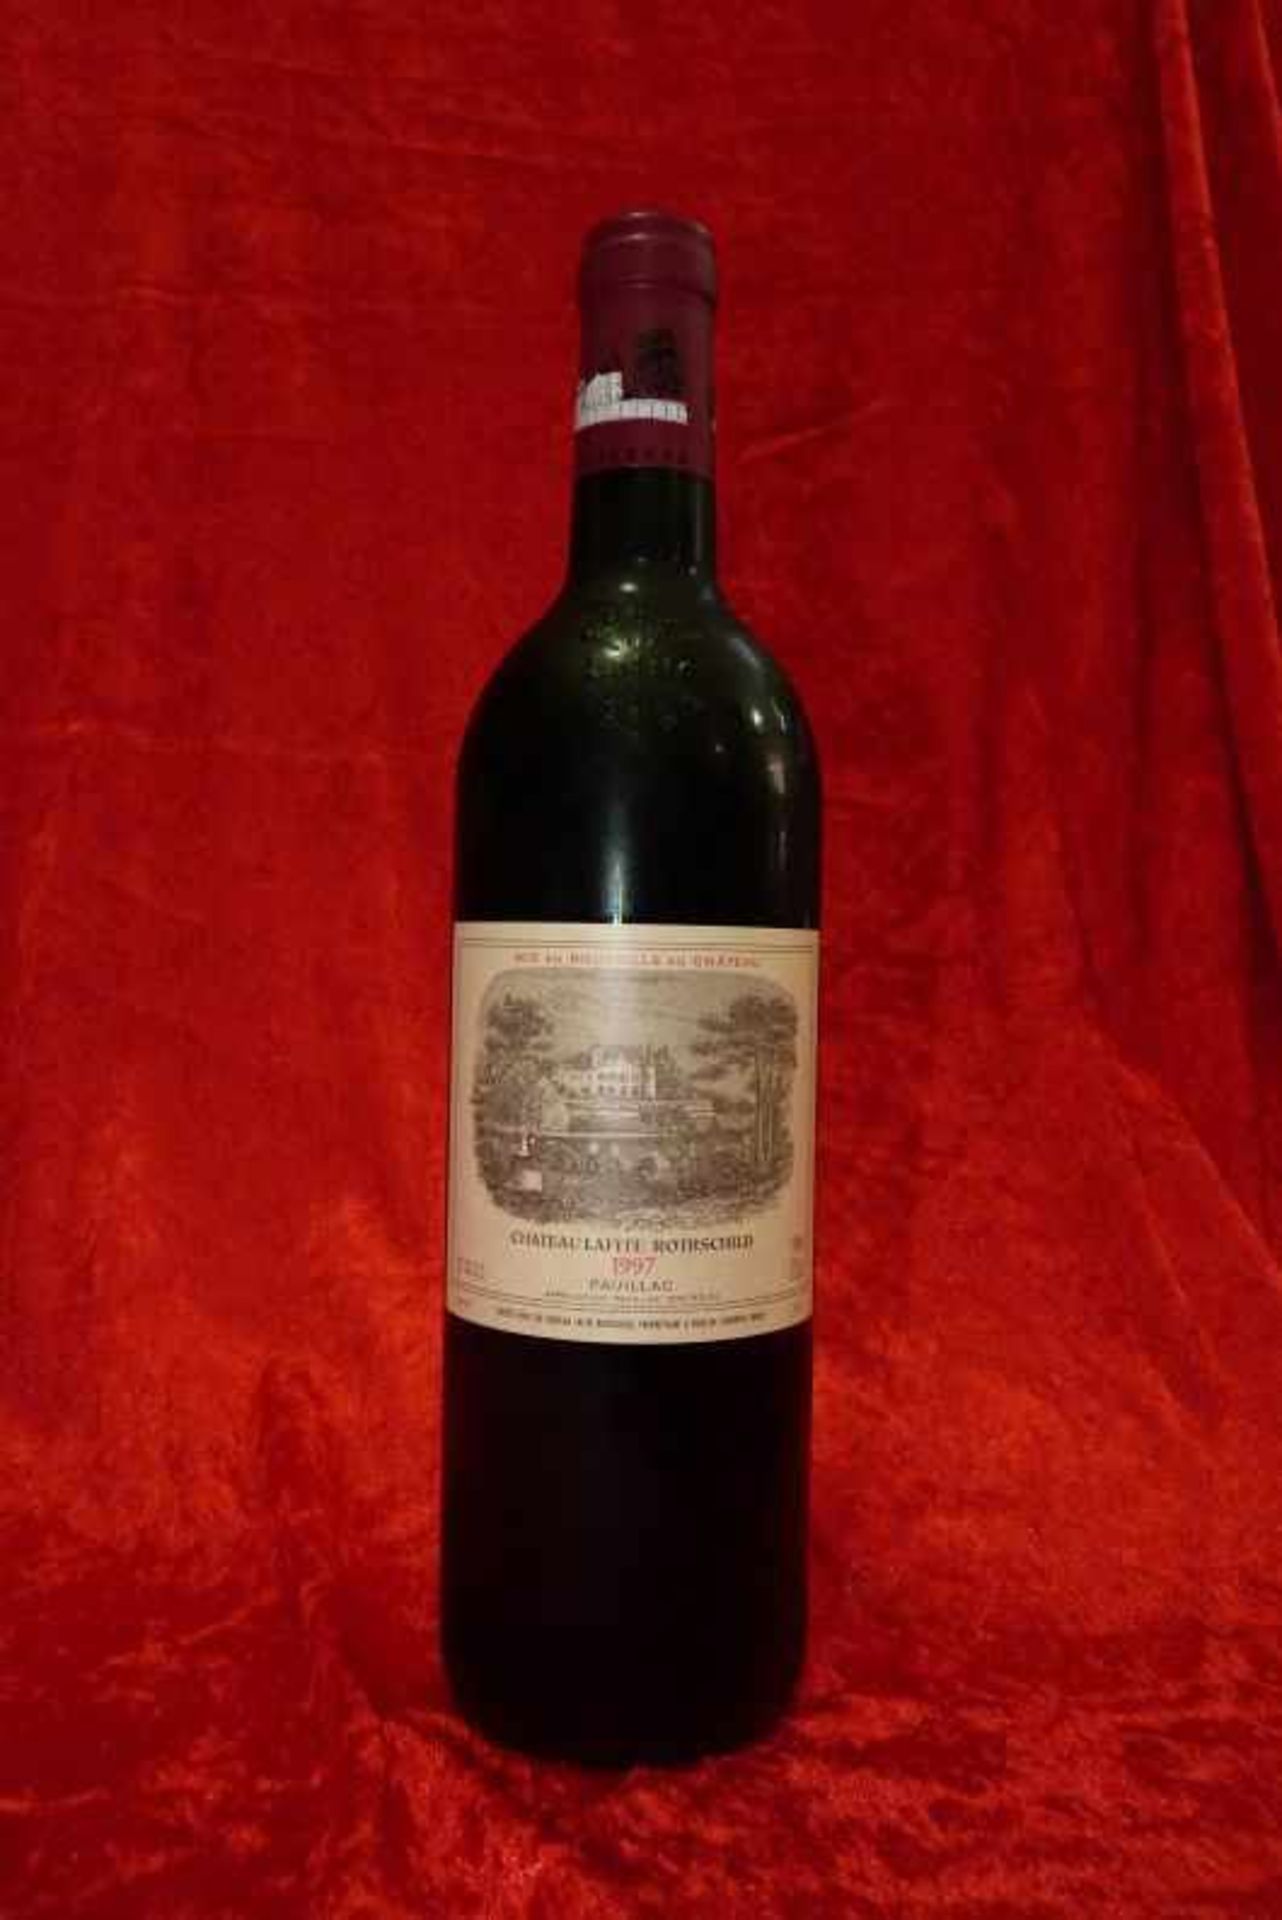 1997 Chateau Lafite Rothschild, Pauillac, France. 1 bottle, 0,75 l, professional storage in a